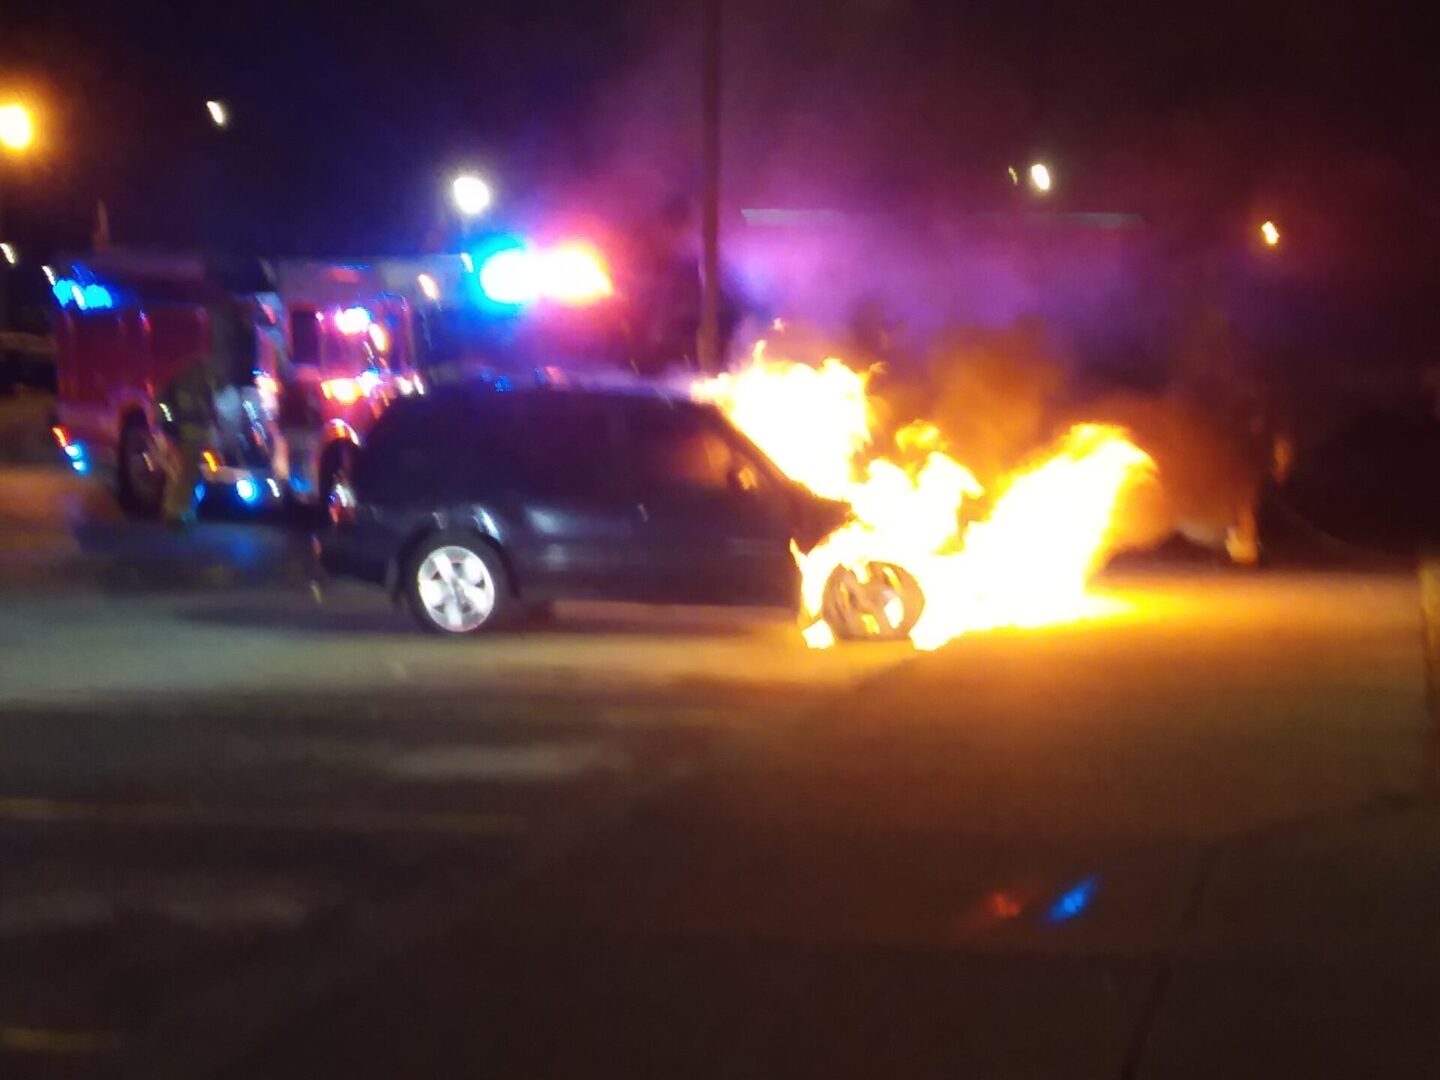 A car on fire in the middle of night.